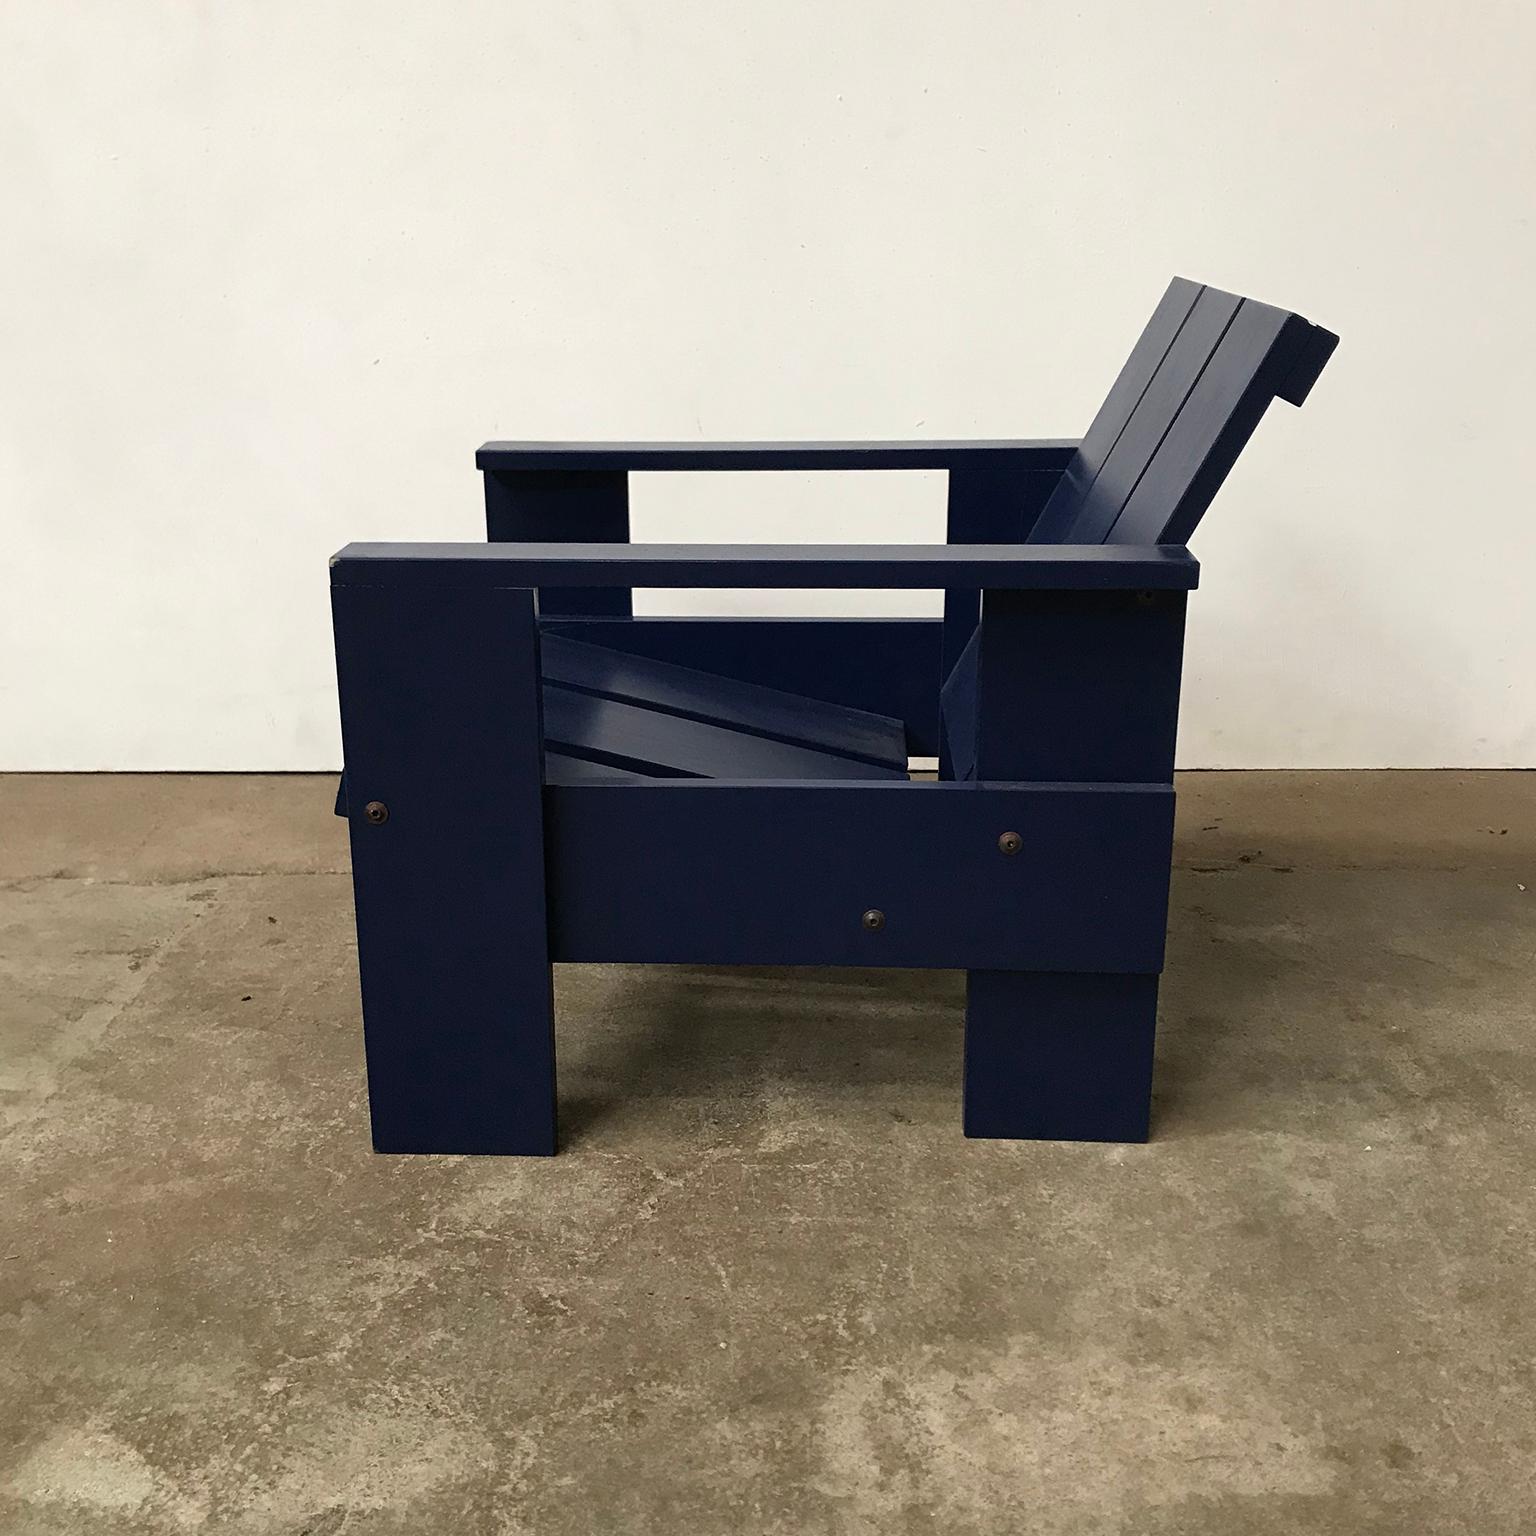 De Stijl 1934, Gerrit Rietveld, by Rietveld Family, Number 41, Children Crate Chair Blue